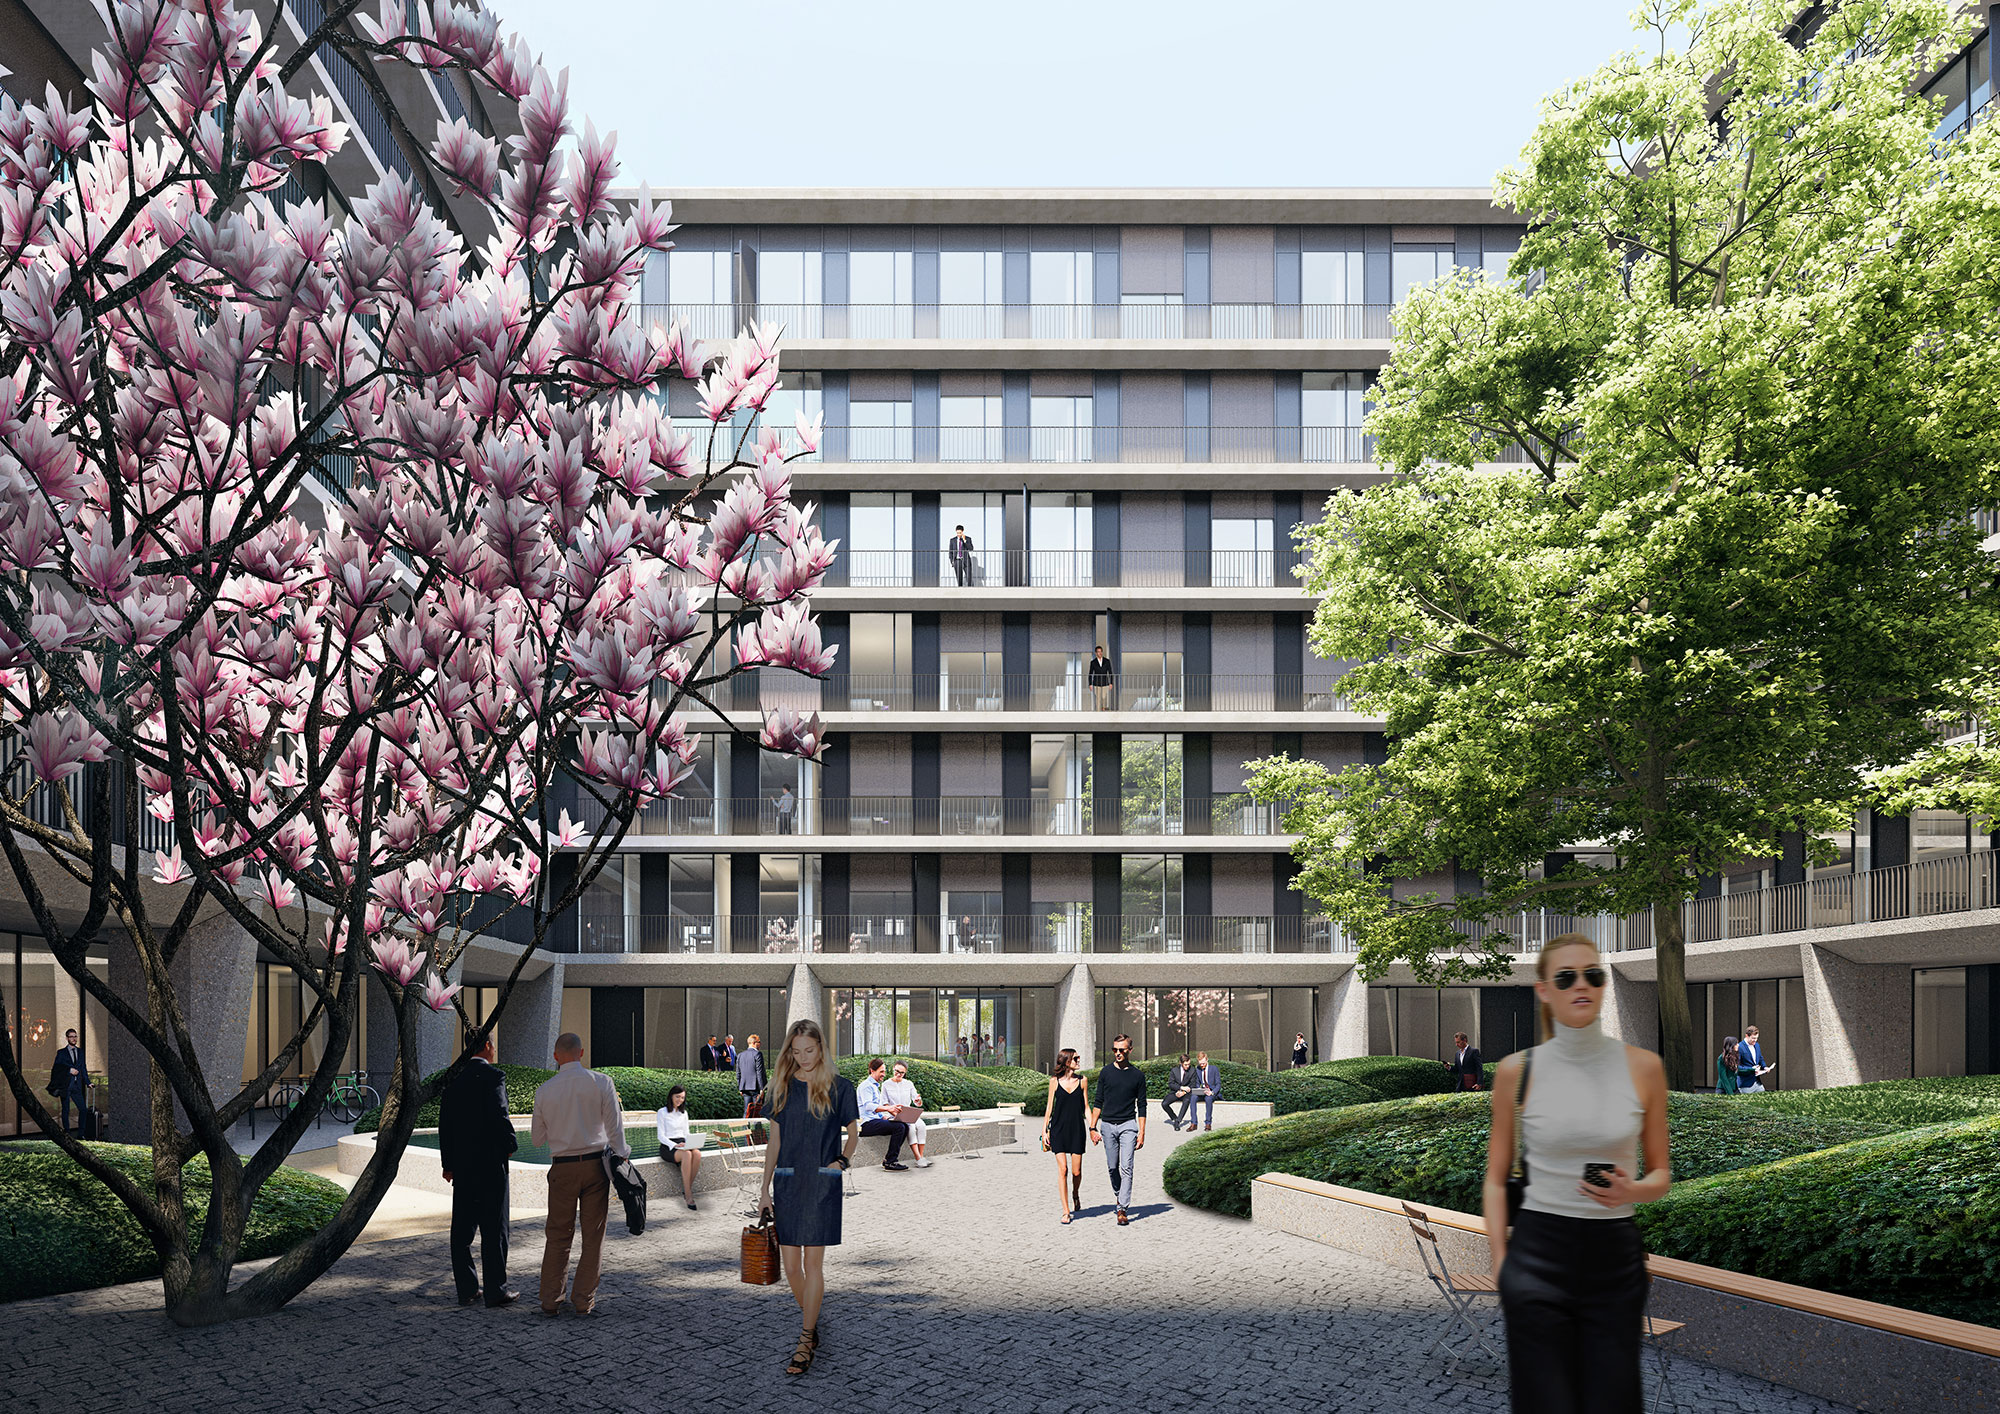 The garden courtyard designed by Enzo Enea becomes KARL's "village square"